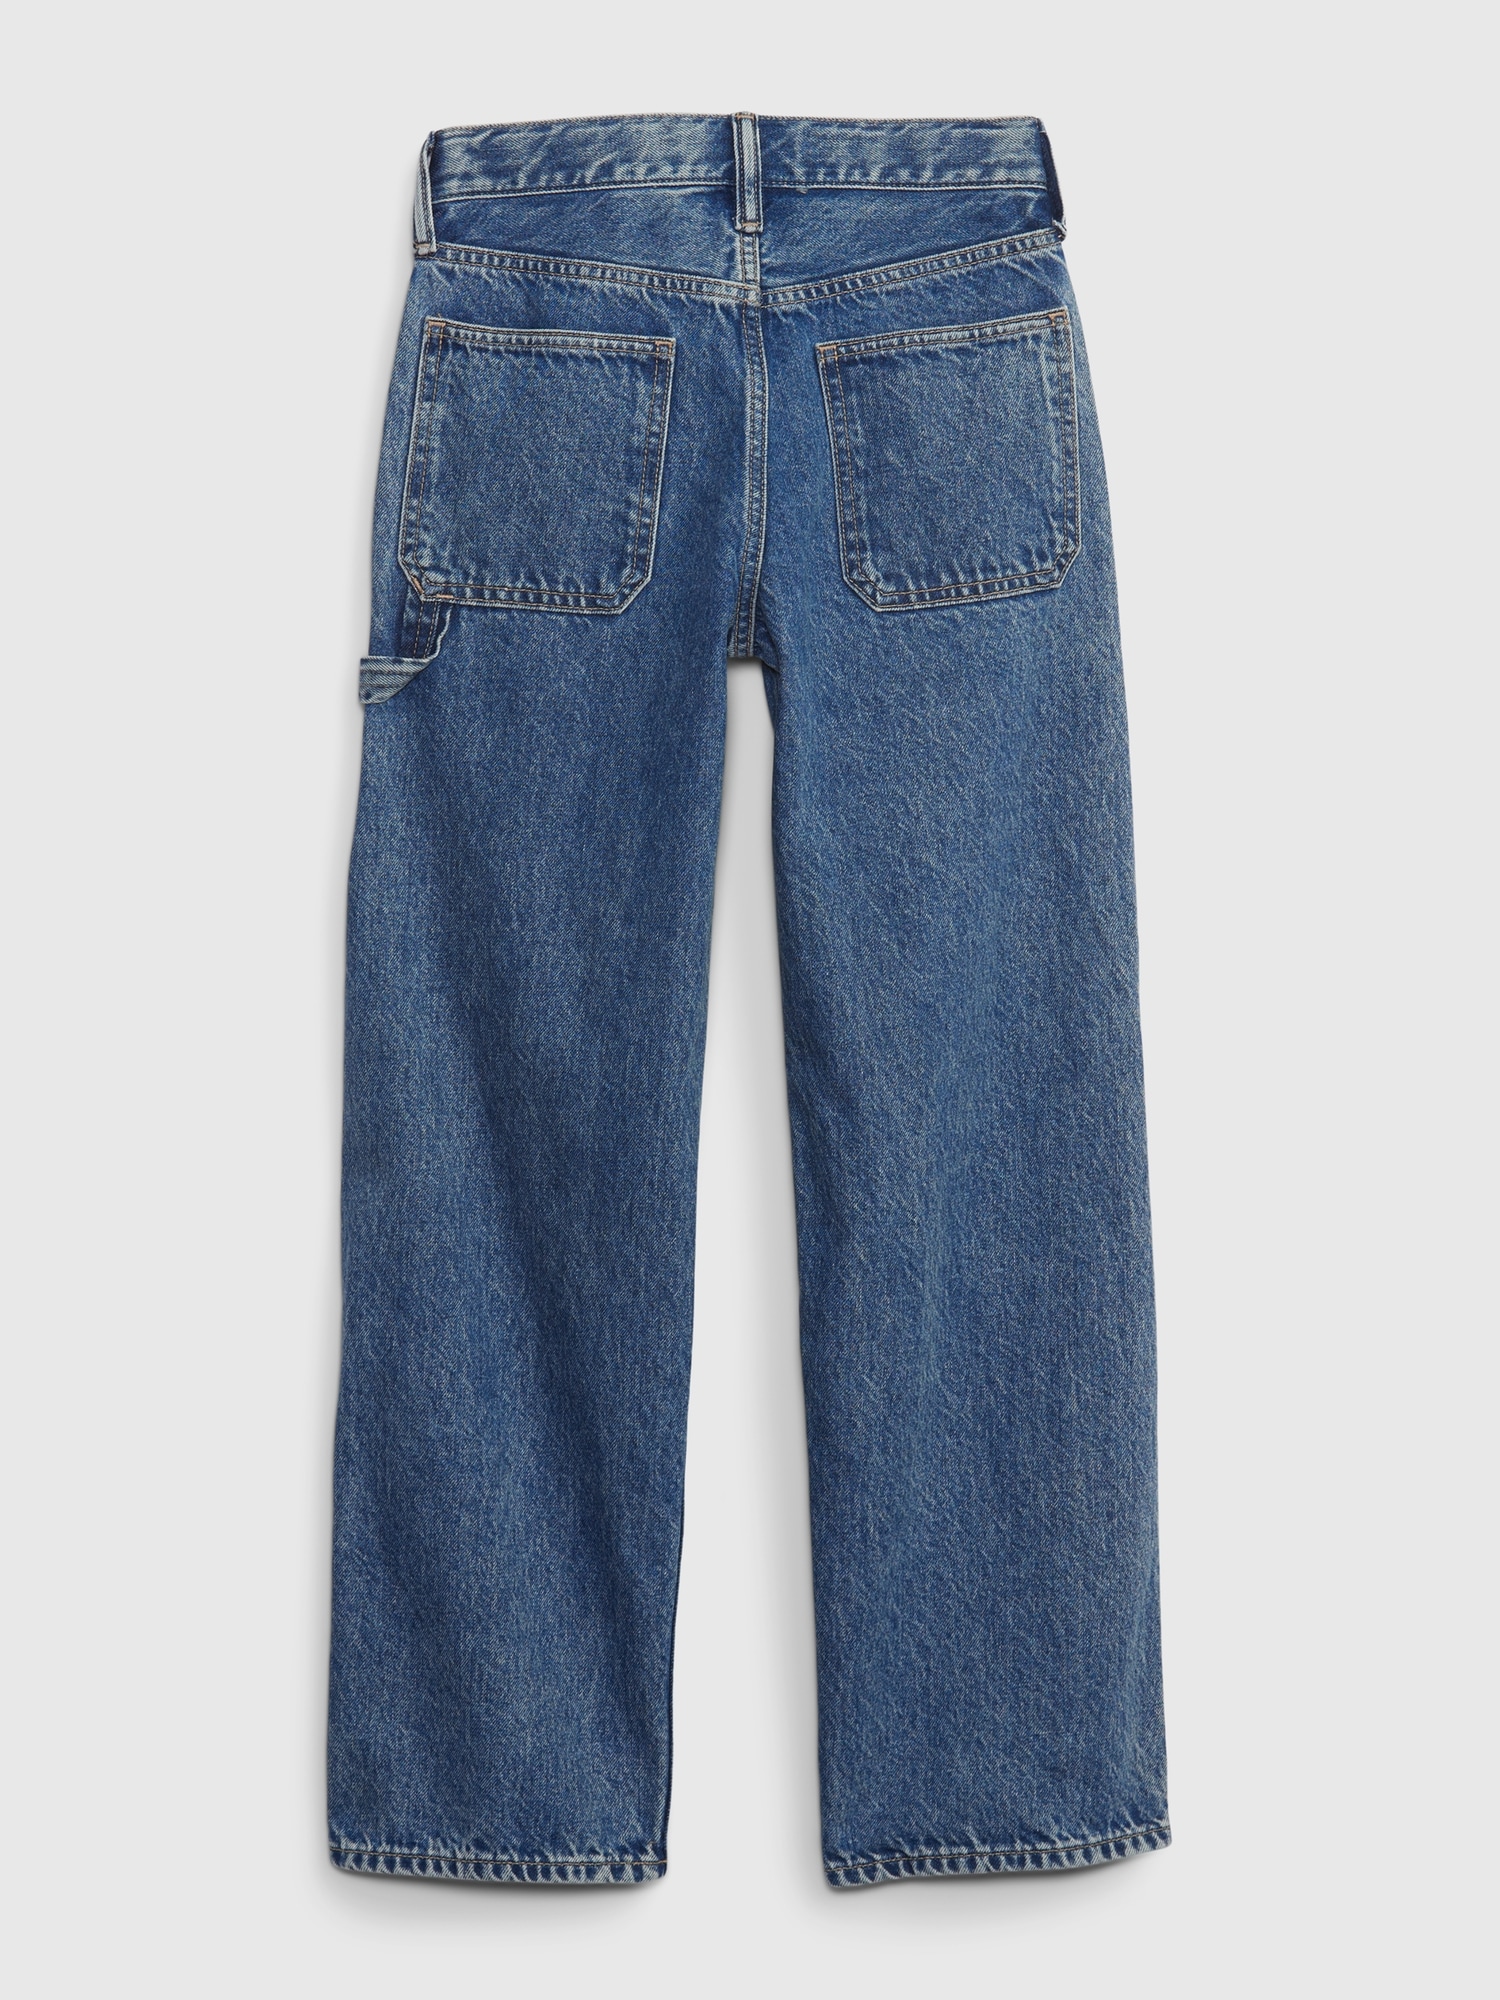 Kids Carpenter Jeans with Washwell | Gap